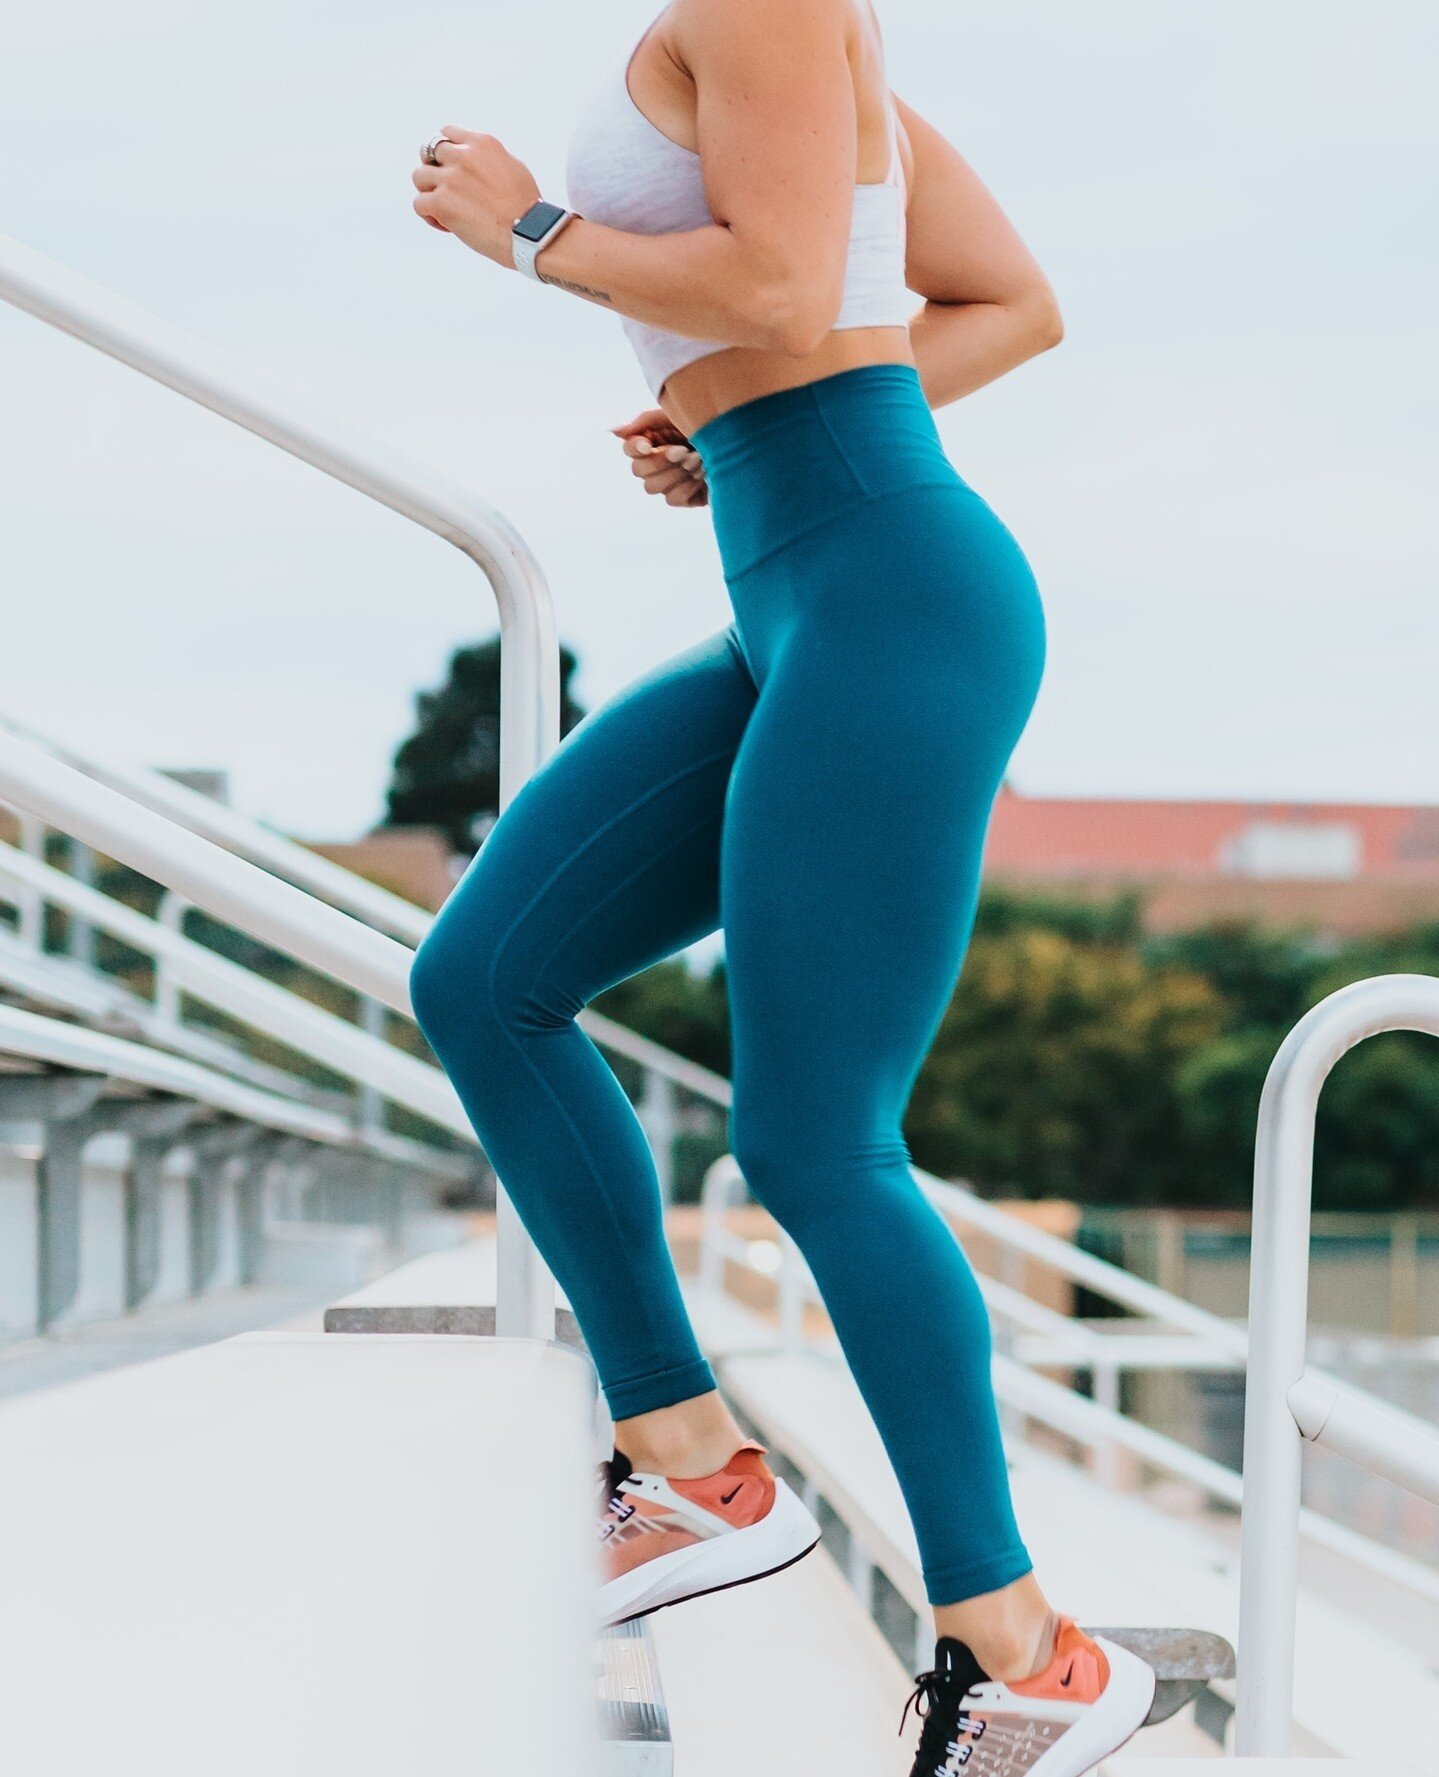 Exercise is a great way to encourage lymph flow at home. ⁠
Physical activity encourages fluid to drain into the lymphatic system in the abdomen. ⁠
⁠
It doesn't have to be an intense workout to help either - rebounding, walking, swimming, yoga, pilate